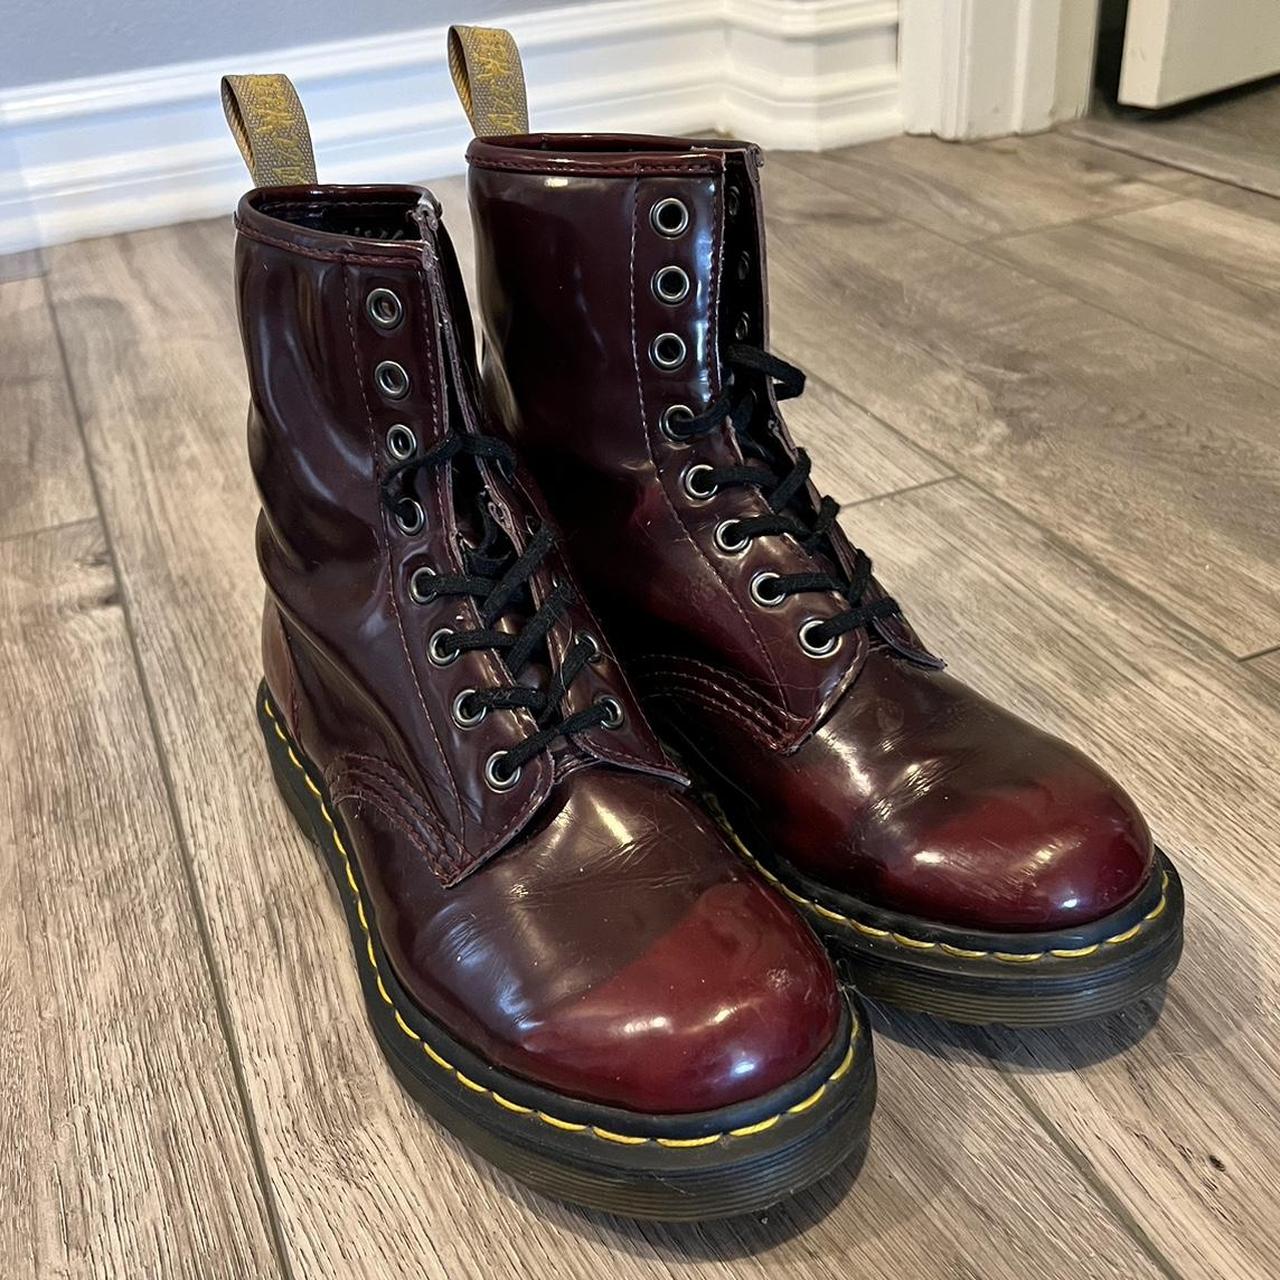 Women's Red and Burgundy Boots | Depop